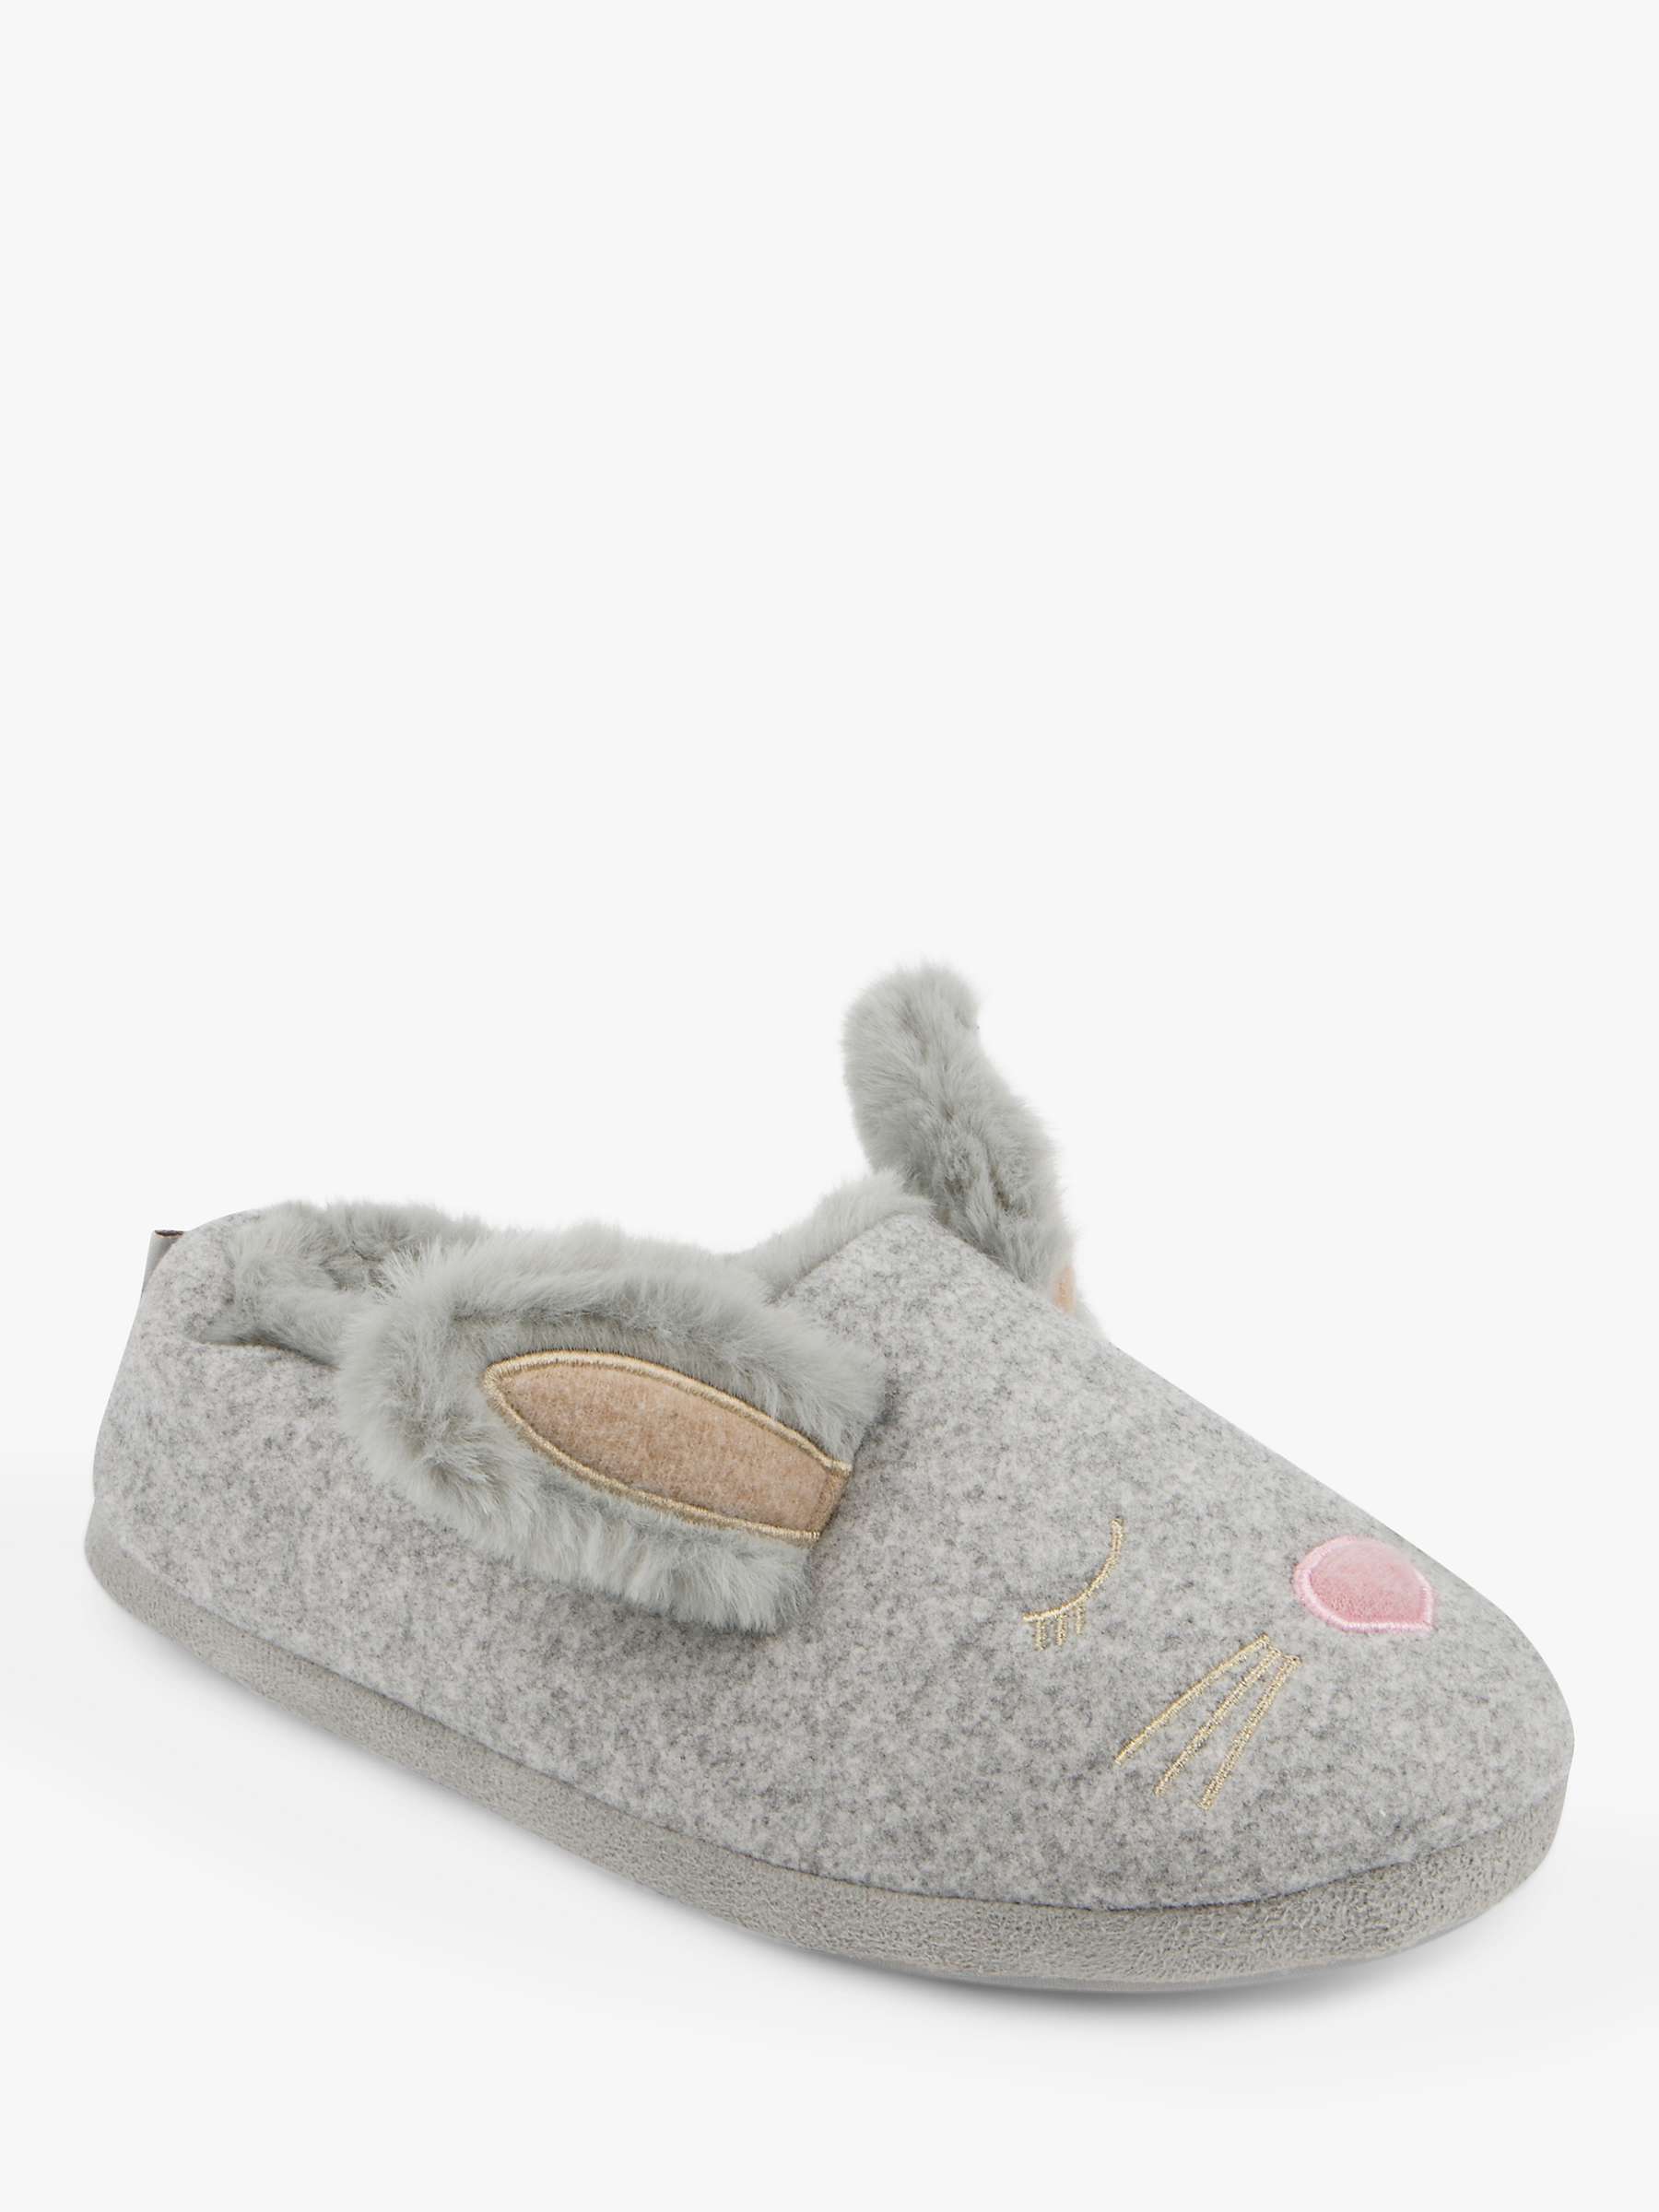 Buy totes Novelty Bunny Slippers, Grey Online at johnlewis.com